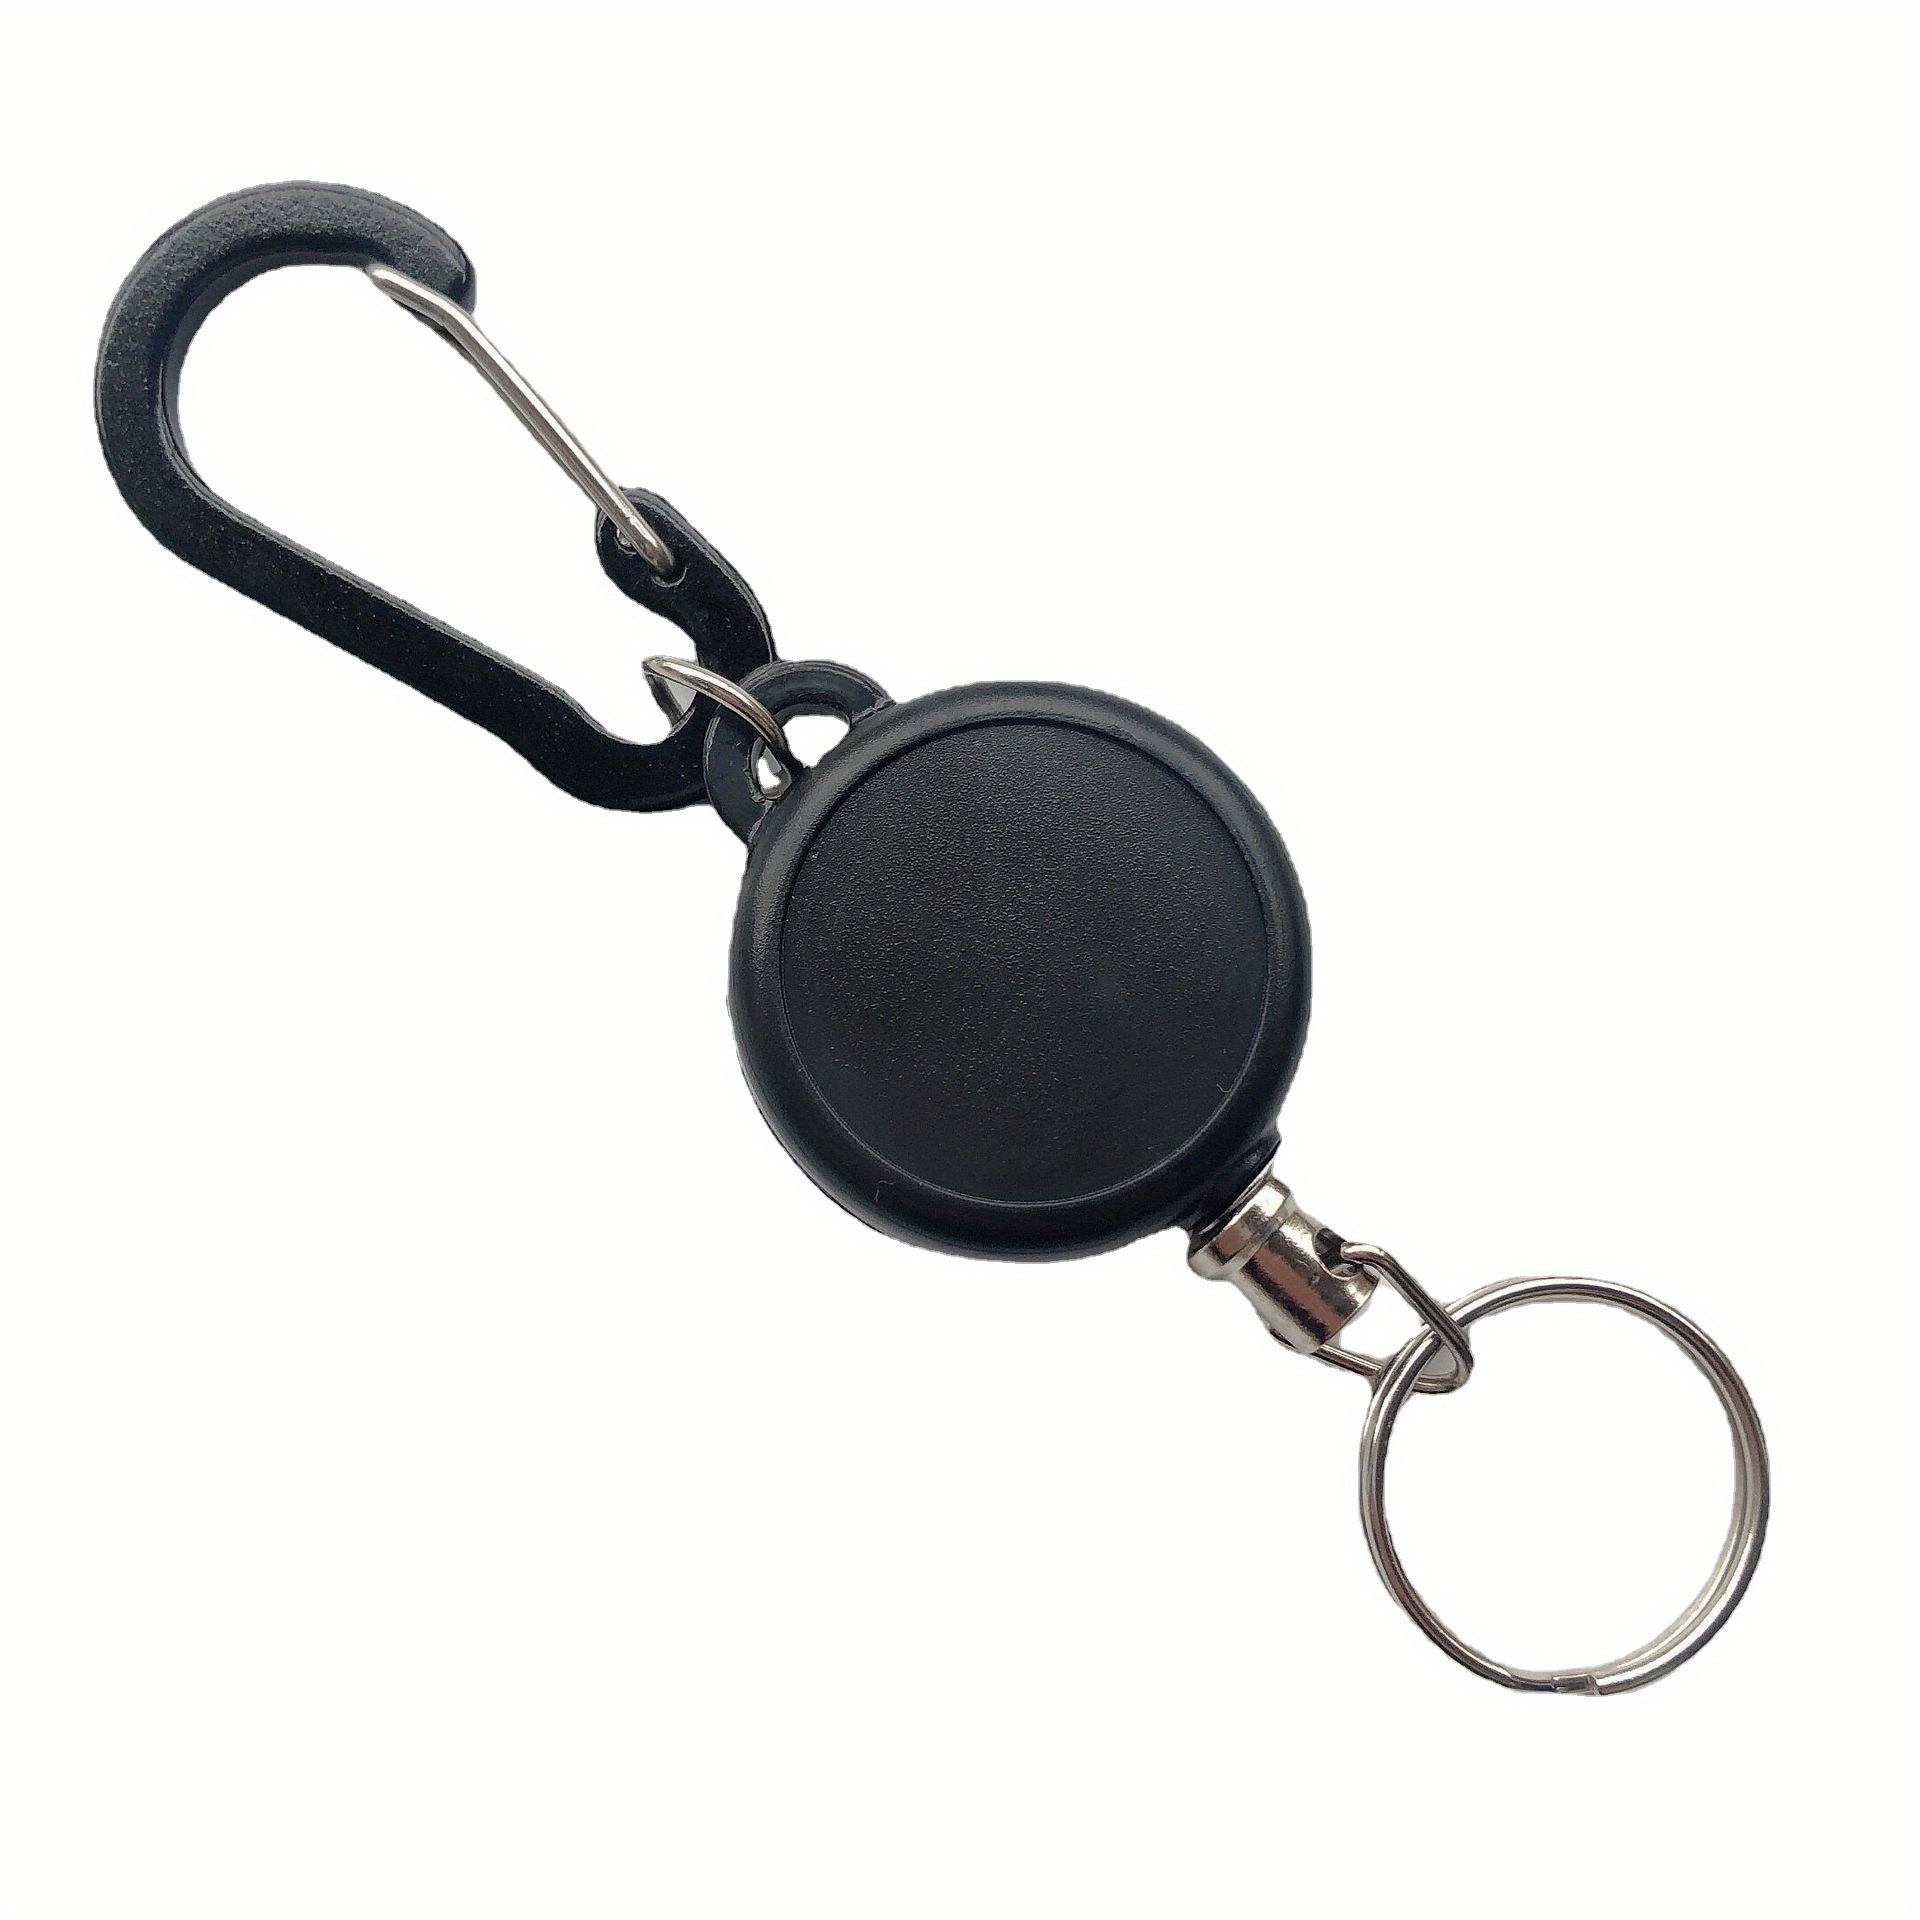 1pc Heavy-Duty Retractable Keychain Retractable Badge Holder Reel Clip ID Badge Holder with Steel Wire Rope, Black ID Card Badge Holder for Office